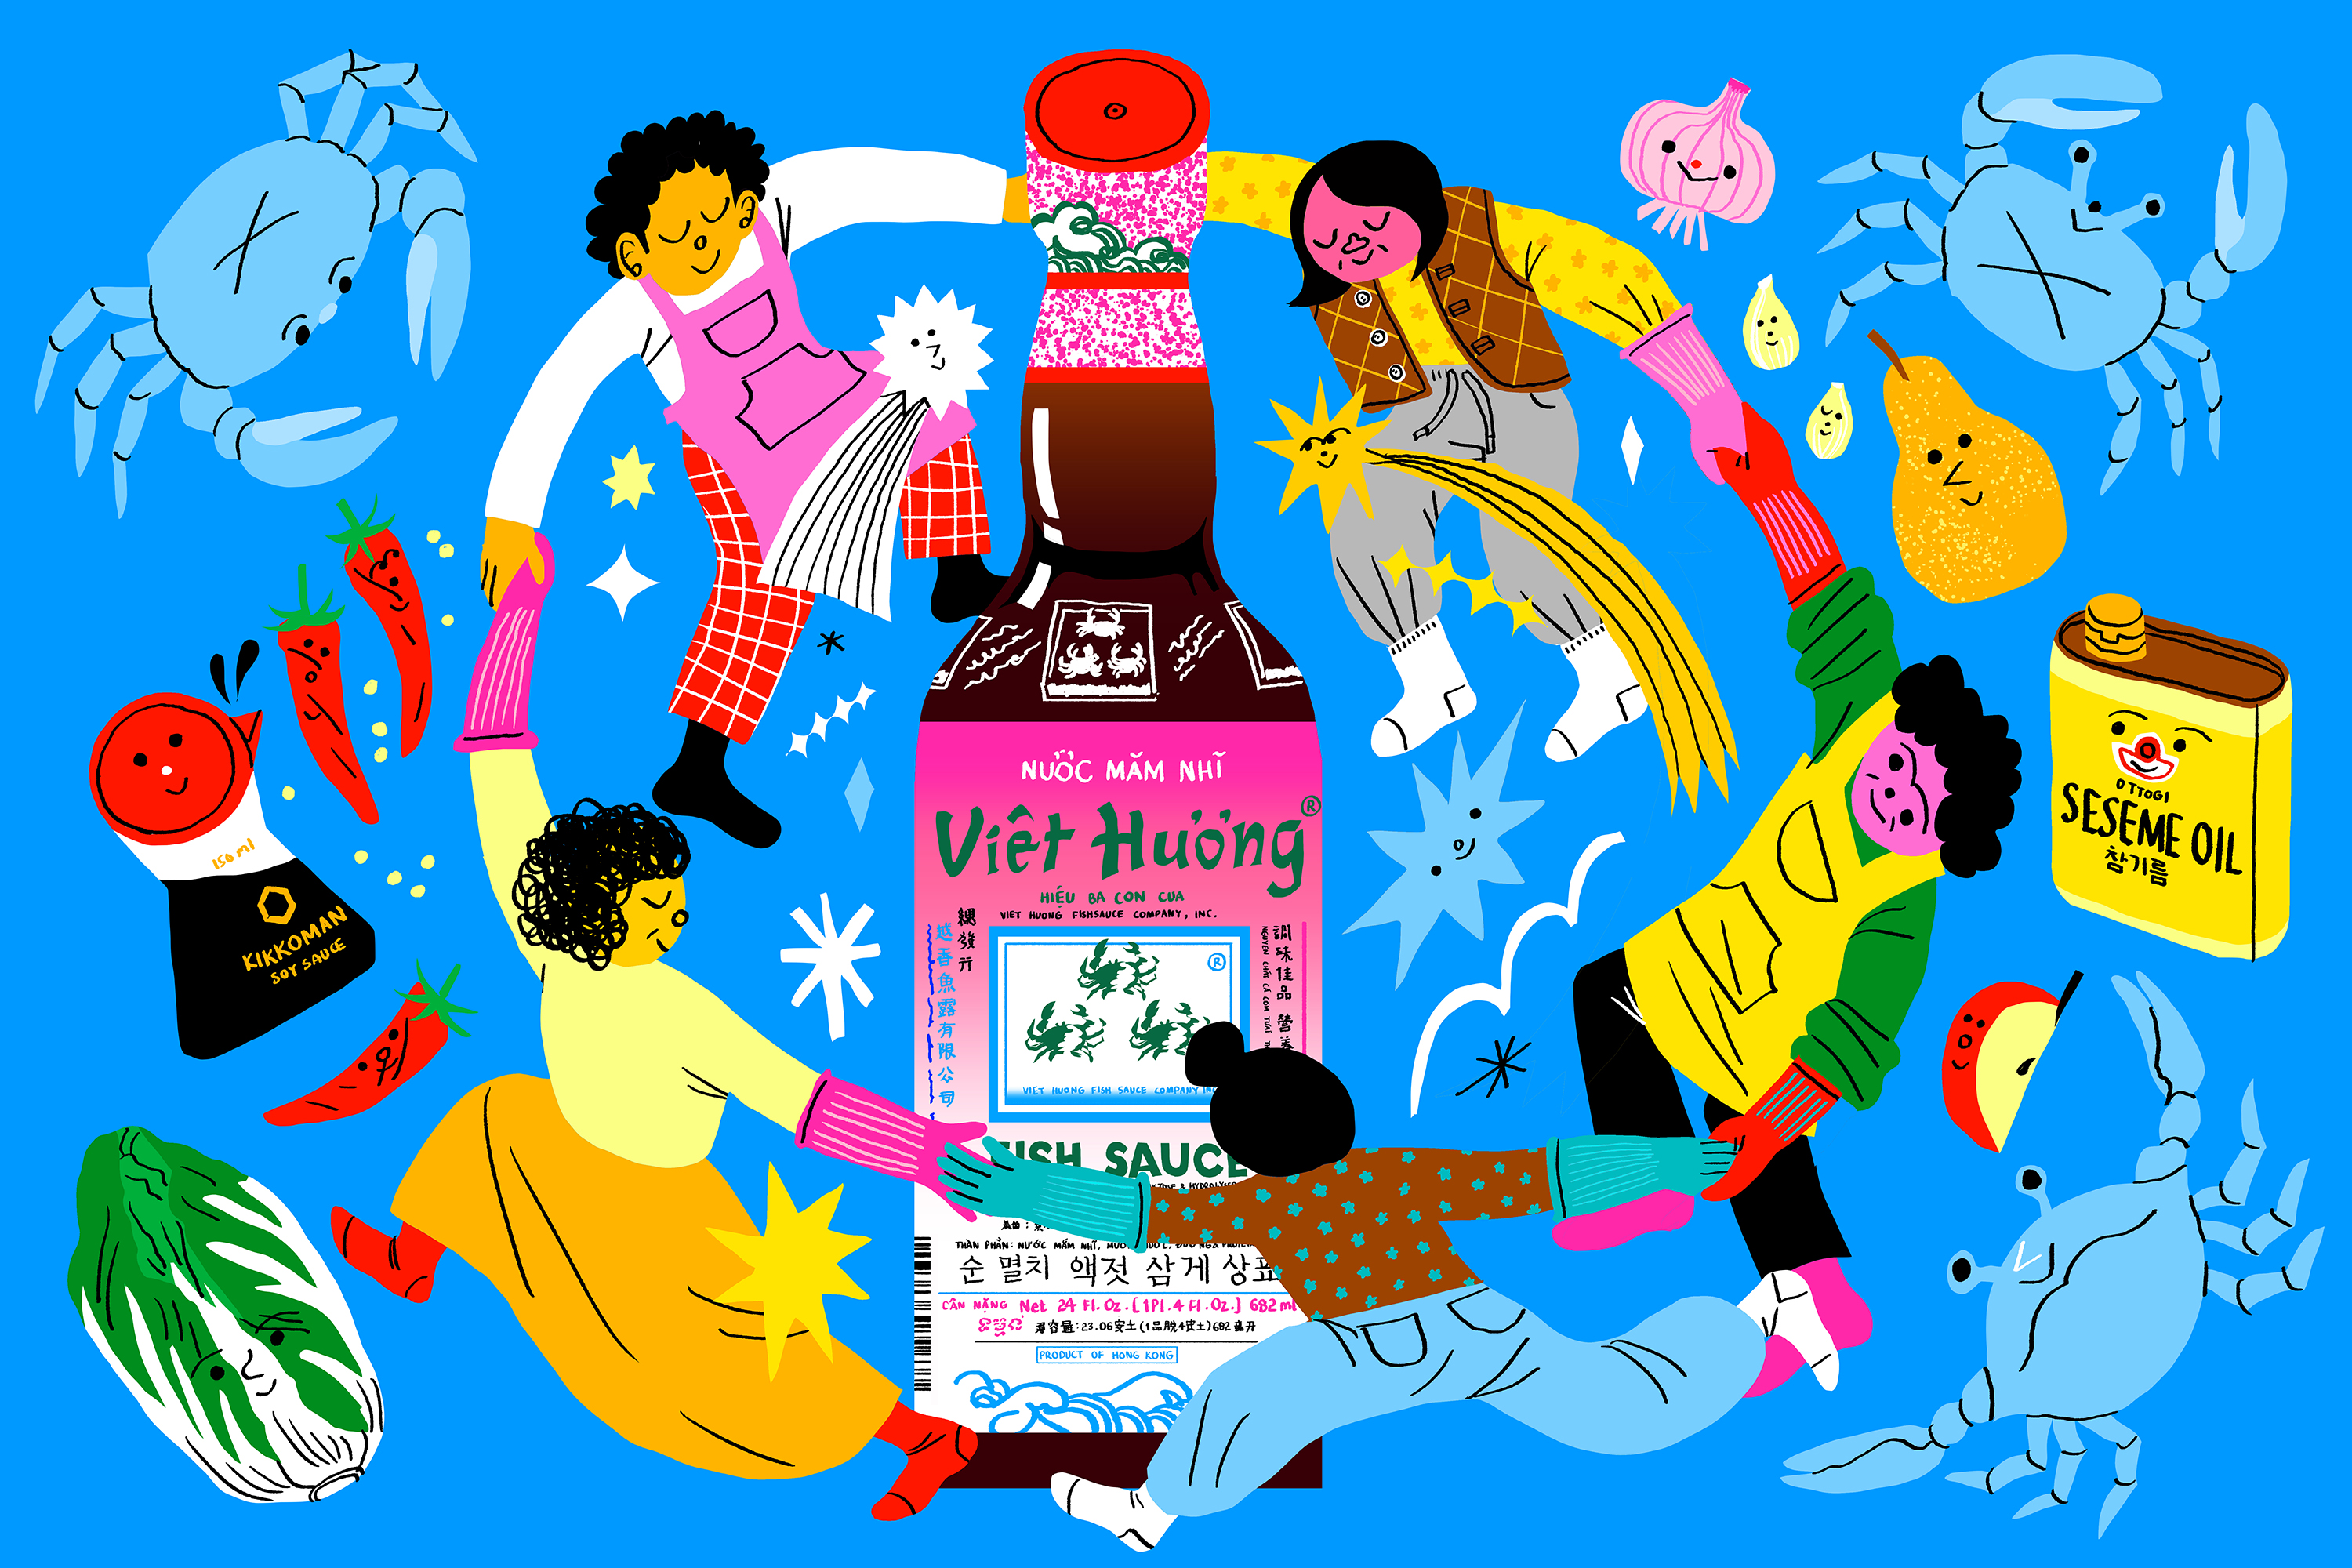 Illustration of five women holding hands and dancing around a bottle of Three Crabs Fish Sauce. Other ingredients like cabbage, crabs, and pear sit alongside.